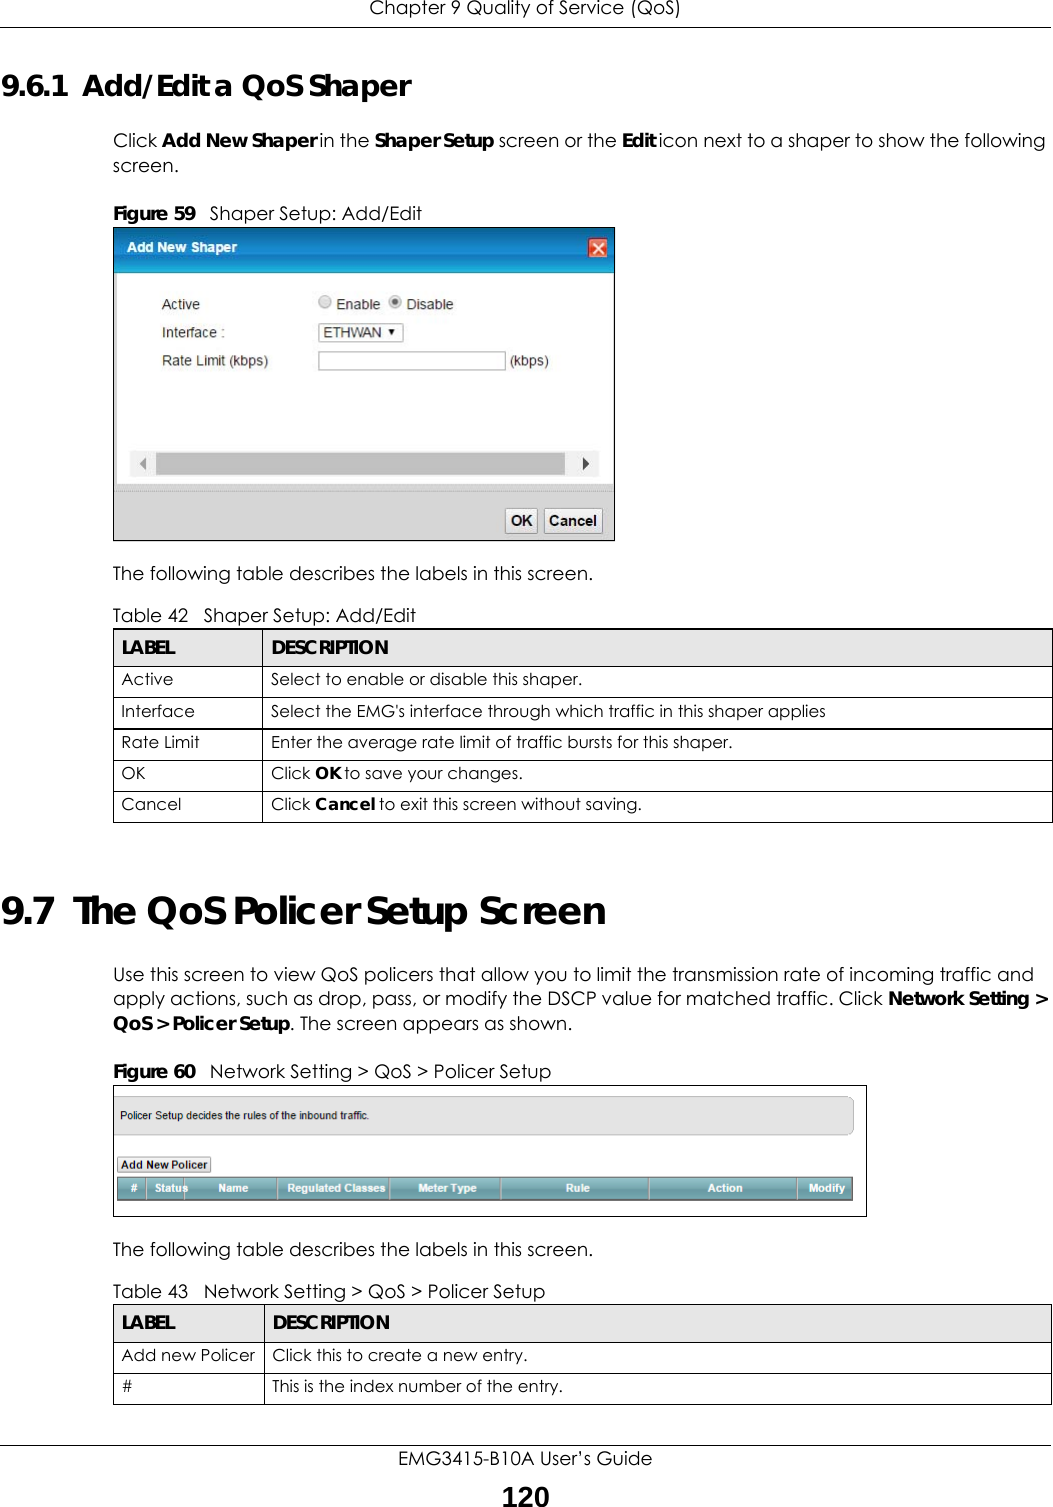 Chapter 9 Quality of Service (QoS)EMG3415-B10A User’s Guide1209.6.1  Add/Edit a QoS Shaper Click Add New Shaper in the Shaper Setup screen or the Edit icon next to a shaper to show the following screen. Figure 59   Shaper Setup: Add/Edit The following table describes the labels in this screen. 9.7  The QoS Policer Setup ScreenUse this screen to view QoS policers that allow you to limit the transmission rate of incoming traffic and apply actions, such as drop, pass, or modify the DSCP value for matched traffic. Click Network Setting &gt; QoS &gt; Policer Setup. The screen appears as shown. Figure 60   Network Setting &gt; QoS &gt; Policer Setup The following table describes the labels in this screen.  Table 42   Shaper Setup: Add/EditLABEL DESCRIPTIONActive Select to enable or disable this shaper.Interface Select the EMG&apos;s interface through which traffic in this shaper appliesRate Limit Enter the average rate limit of traffic bursts for this shaper.OK Click OK to save your changes.Cancel Click Cancel to exit this screen without saving.Table 43   Network Setting &gt; QoS &gt; Policer SetupLABEL DESCRIPTIONAdd new Policer Click this to create a new entry.#This is the index number of the entry.